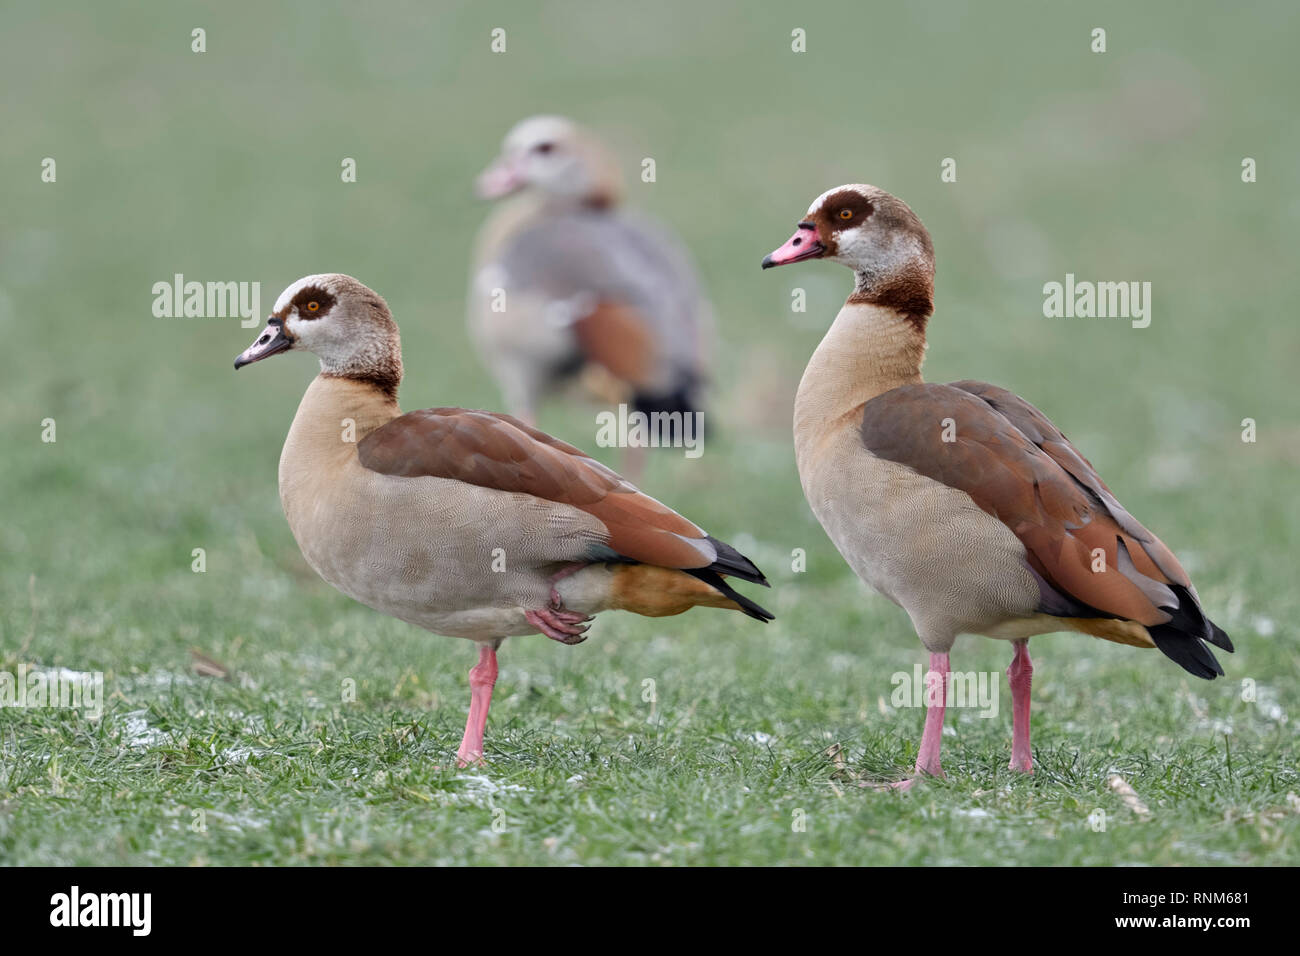 Egyptian Geese / Nilgaense (Alopochen aegyptiacus) pair in winter with a third young one in background,  standing on frosty farmland, wildlife, Europe Stock Photo